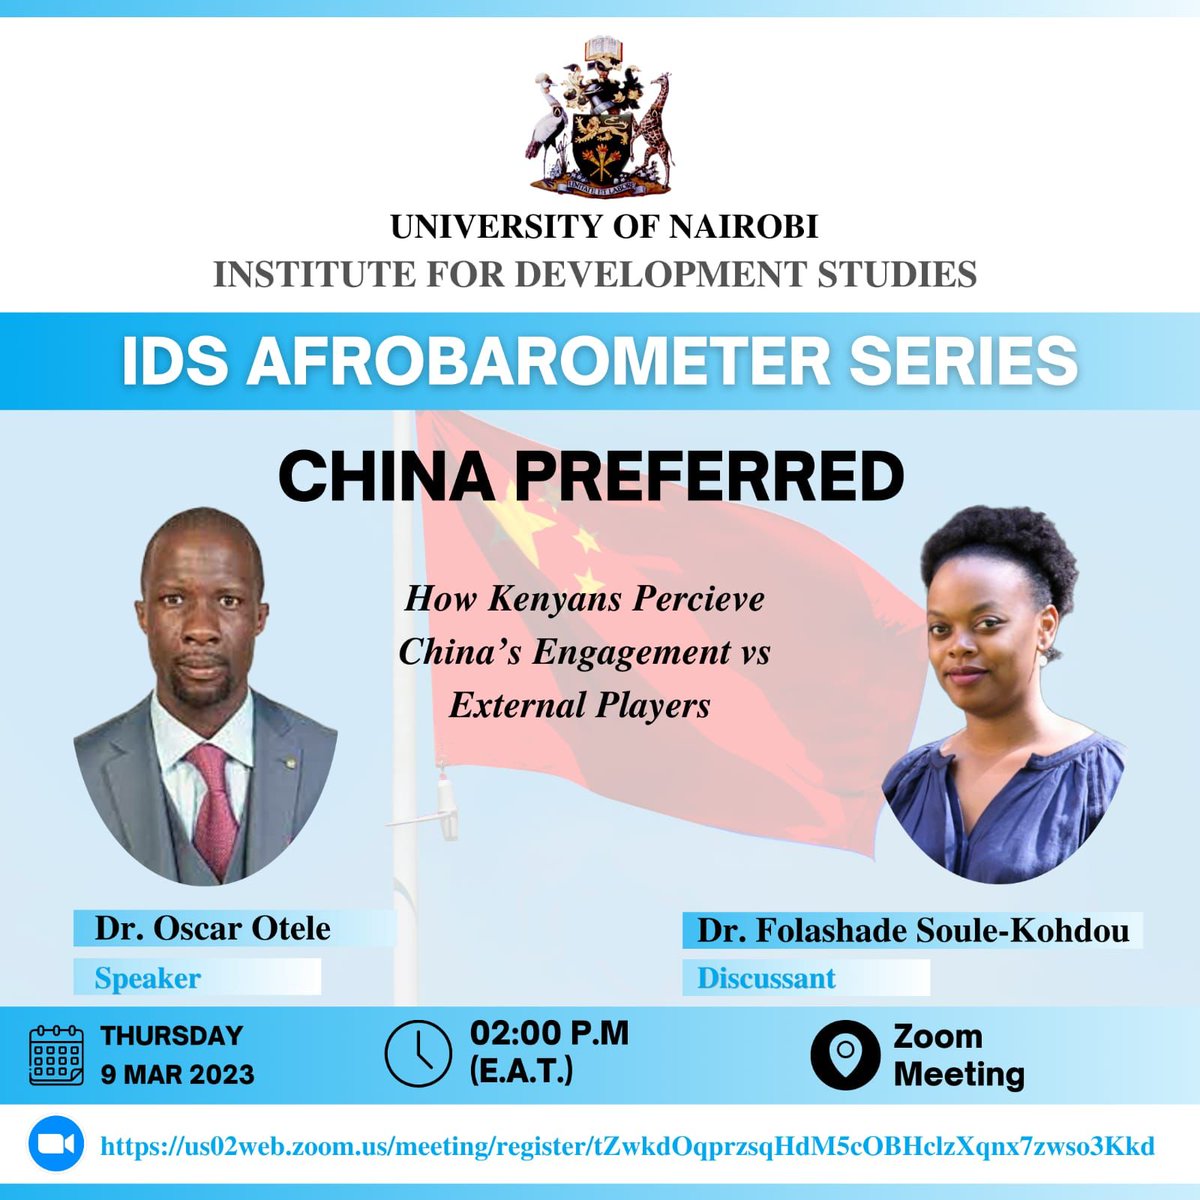 China’s engagement in Africa has expanded and is a subject of debate and scrutiny.  Happening this Thursday, How do Kenyans perceive China’s
engagement?  @IDS_UONBI, @uonbi,@folasoule,@Otele_Oscar  #IDSUoNResearch, #IDSAfrobarometerSeries
#IsChinaPreferred?
#WeAreUoN